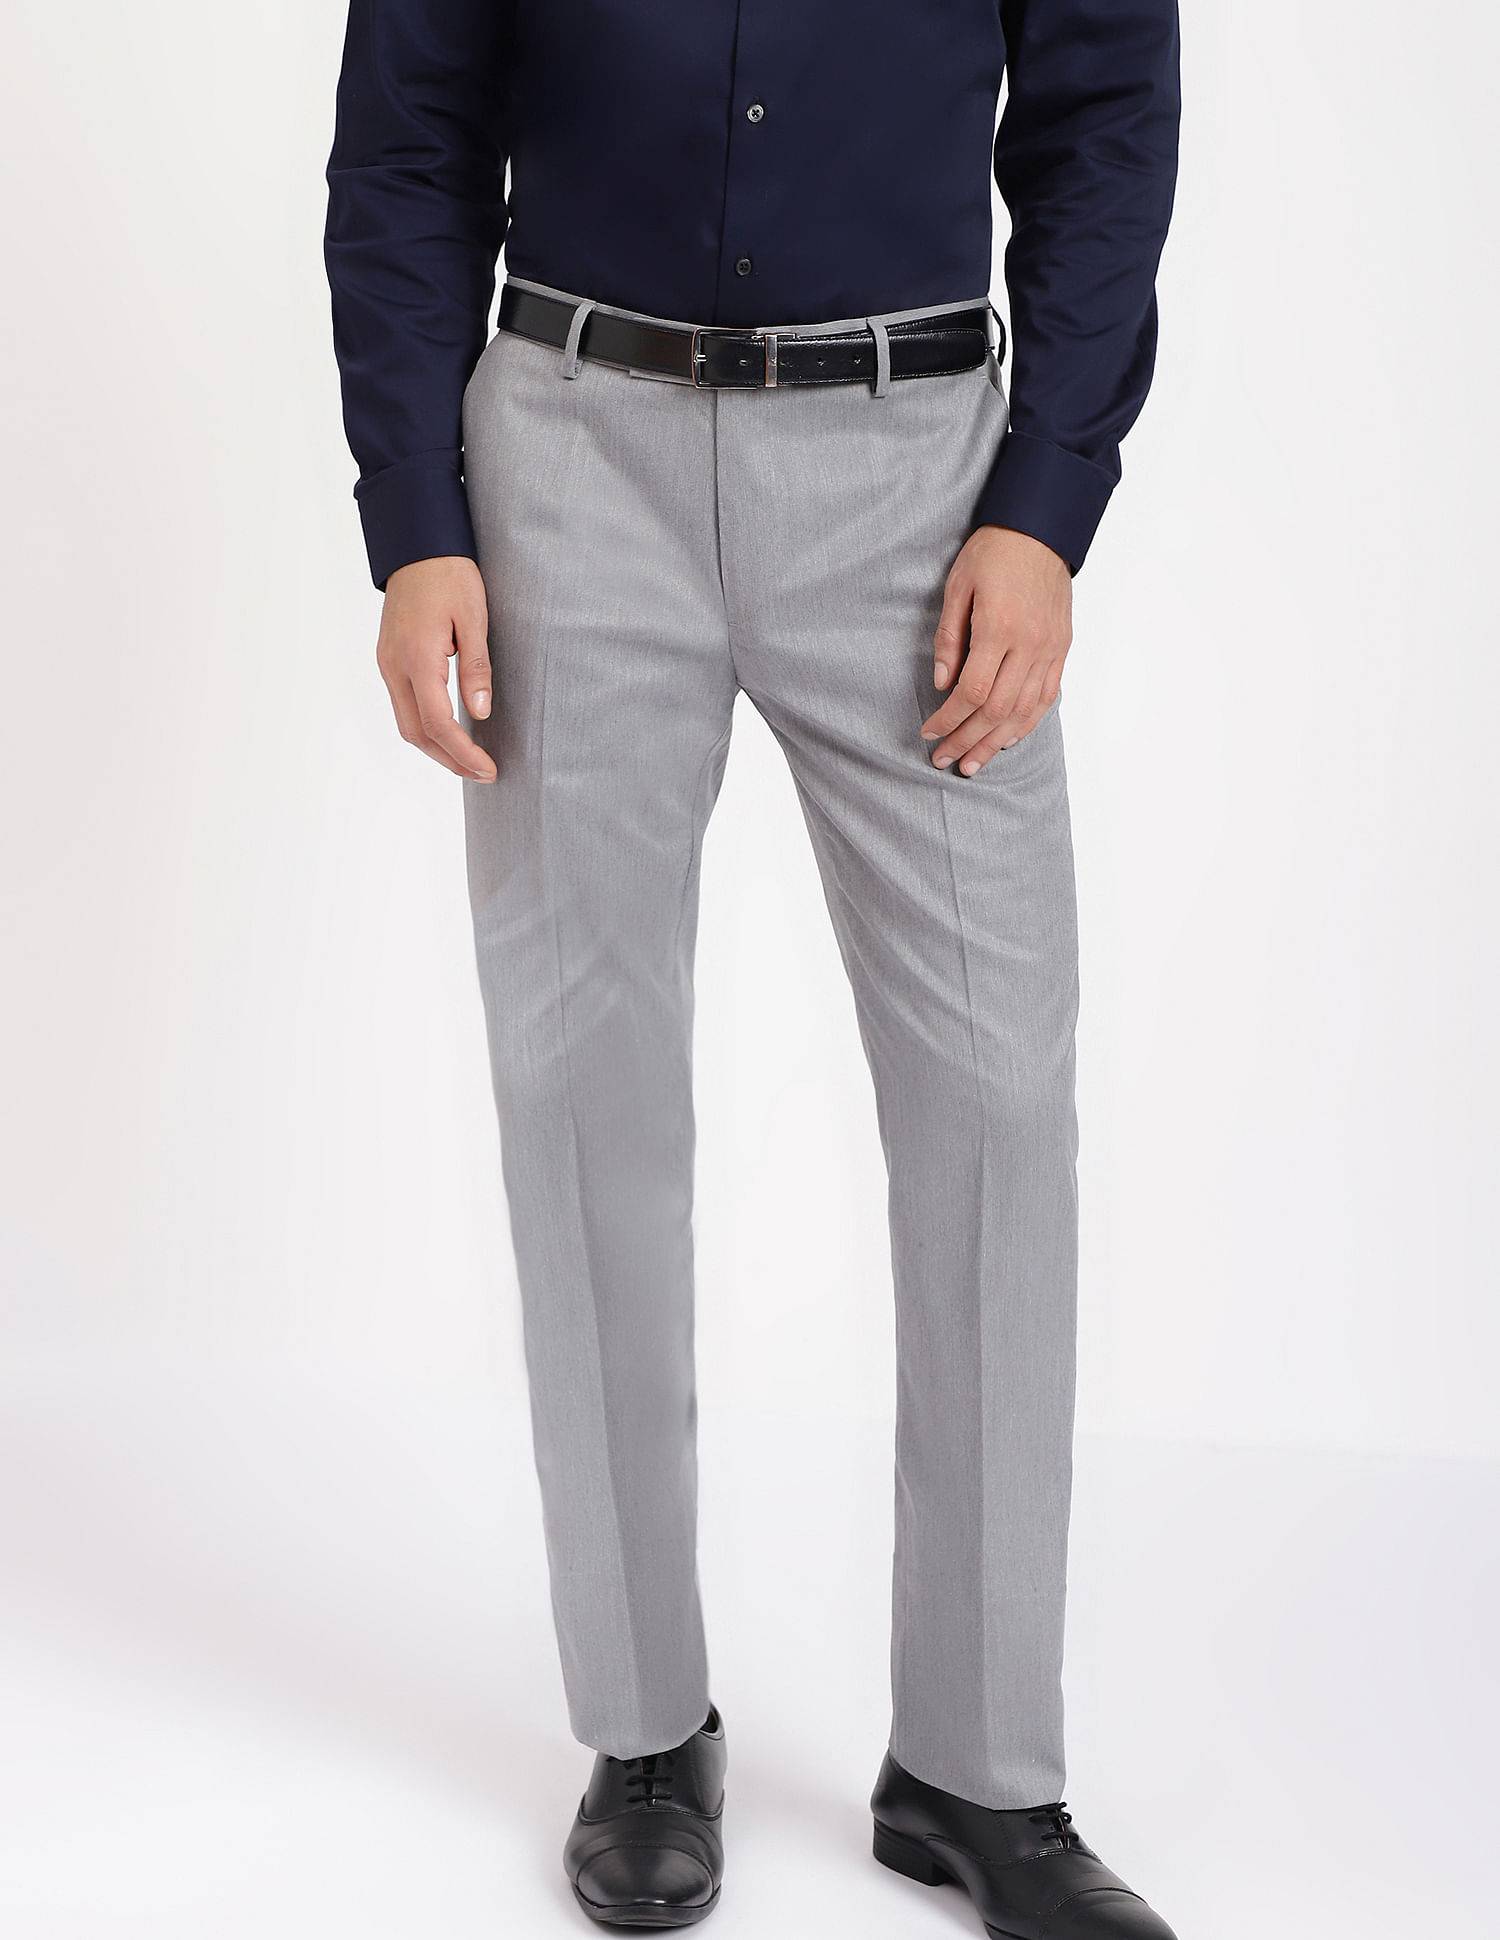 Custom Trouser Design  Business Casual and Formal  Proper Cloth Help